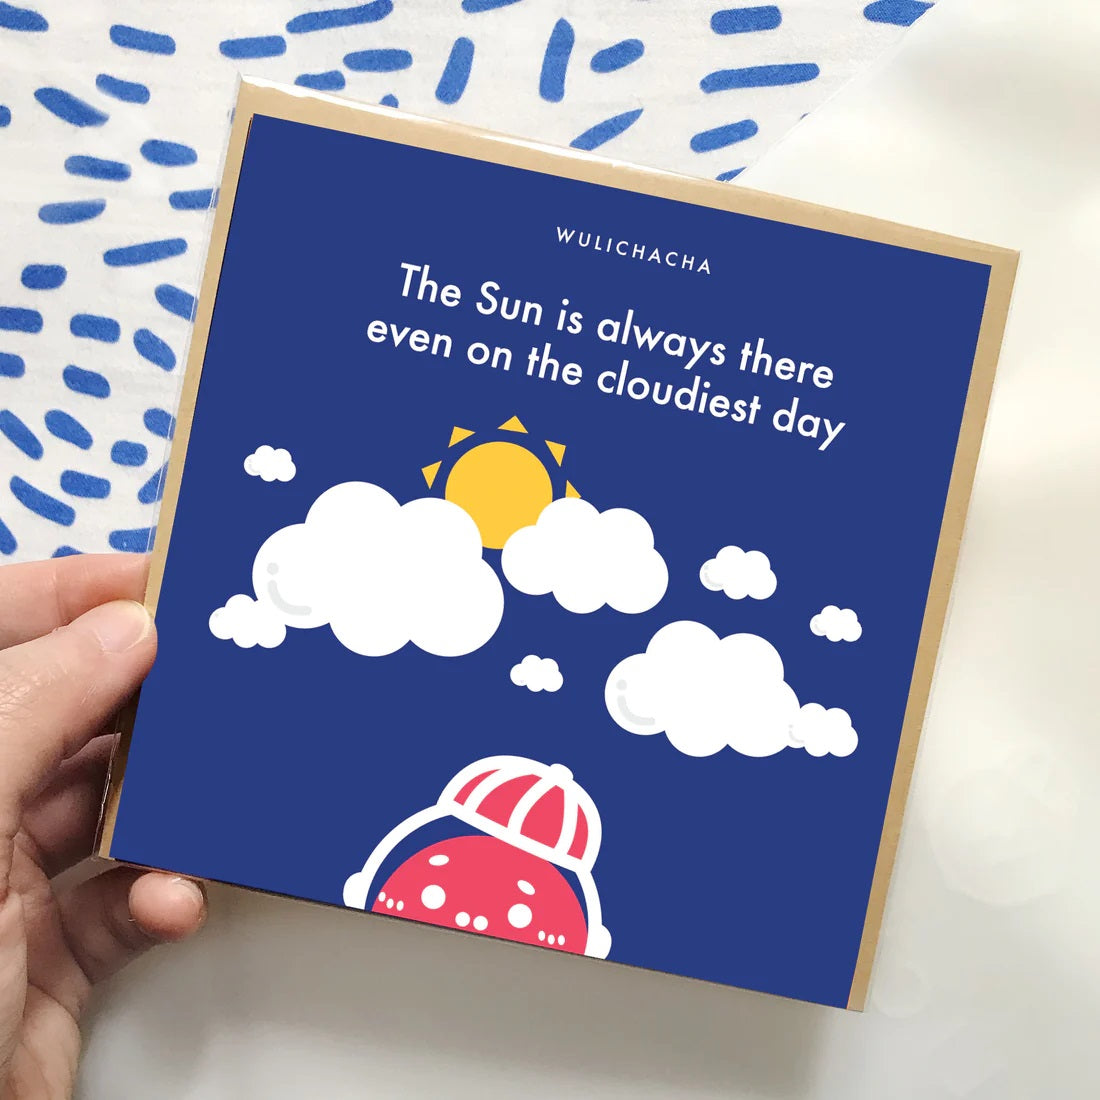 Wulichacha Greeting Card (The sun is always there even on the cloudiest day)